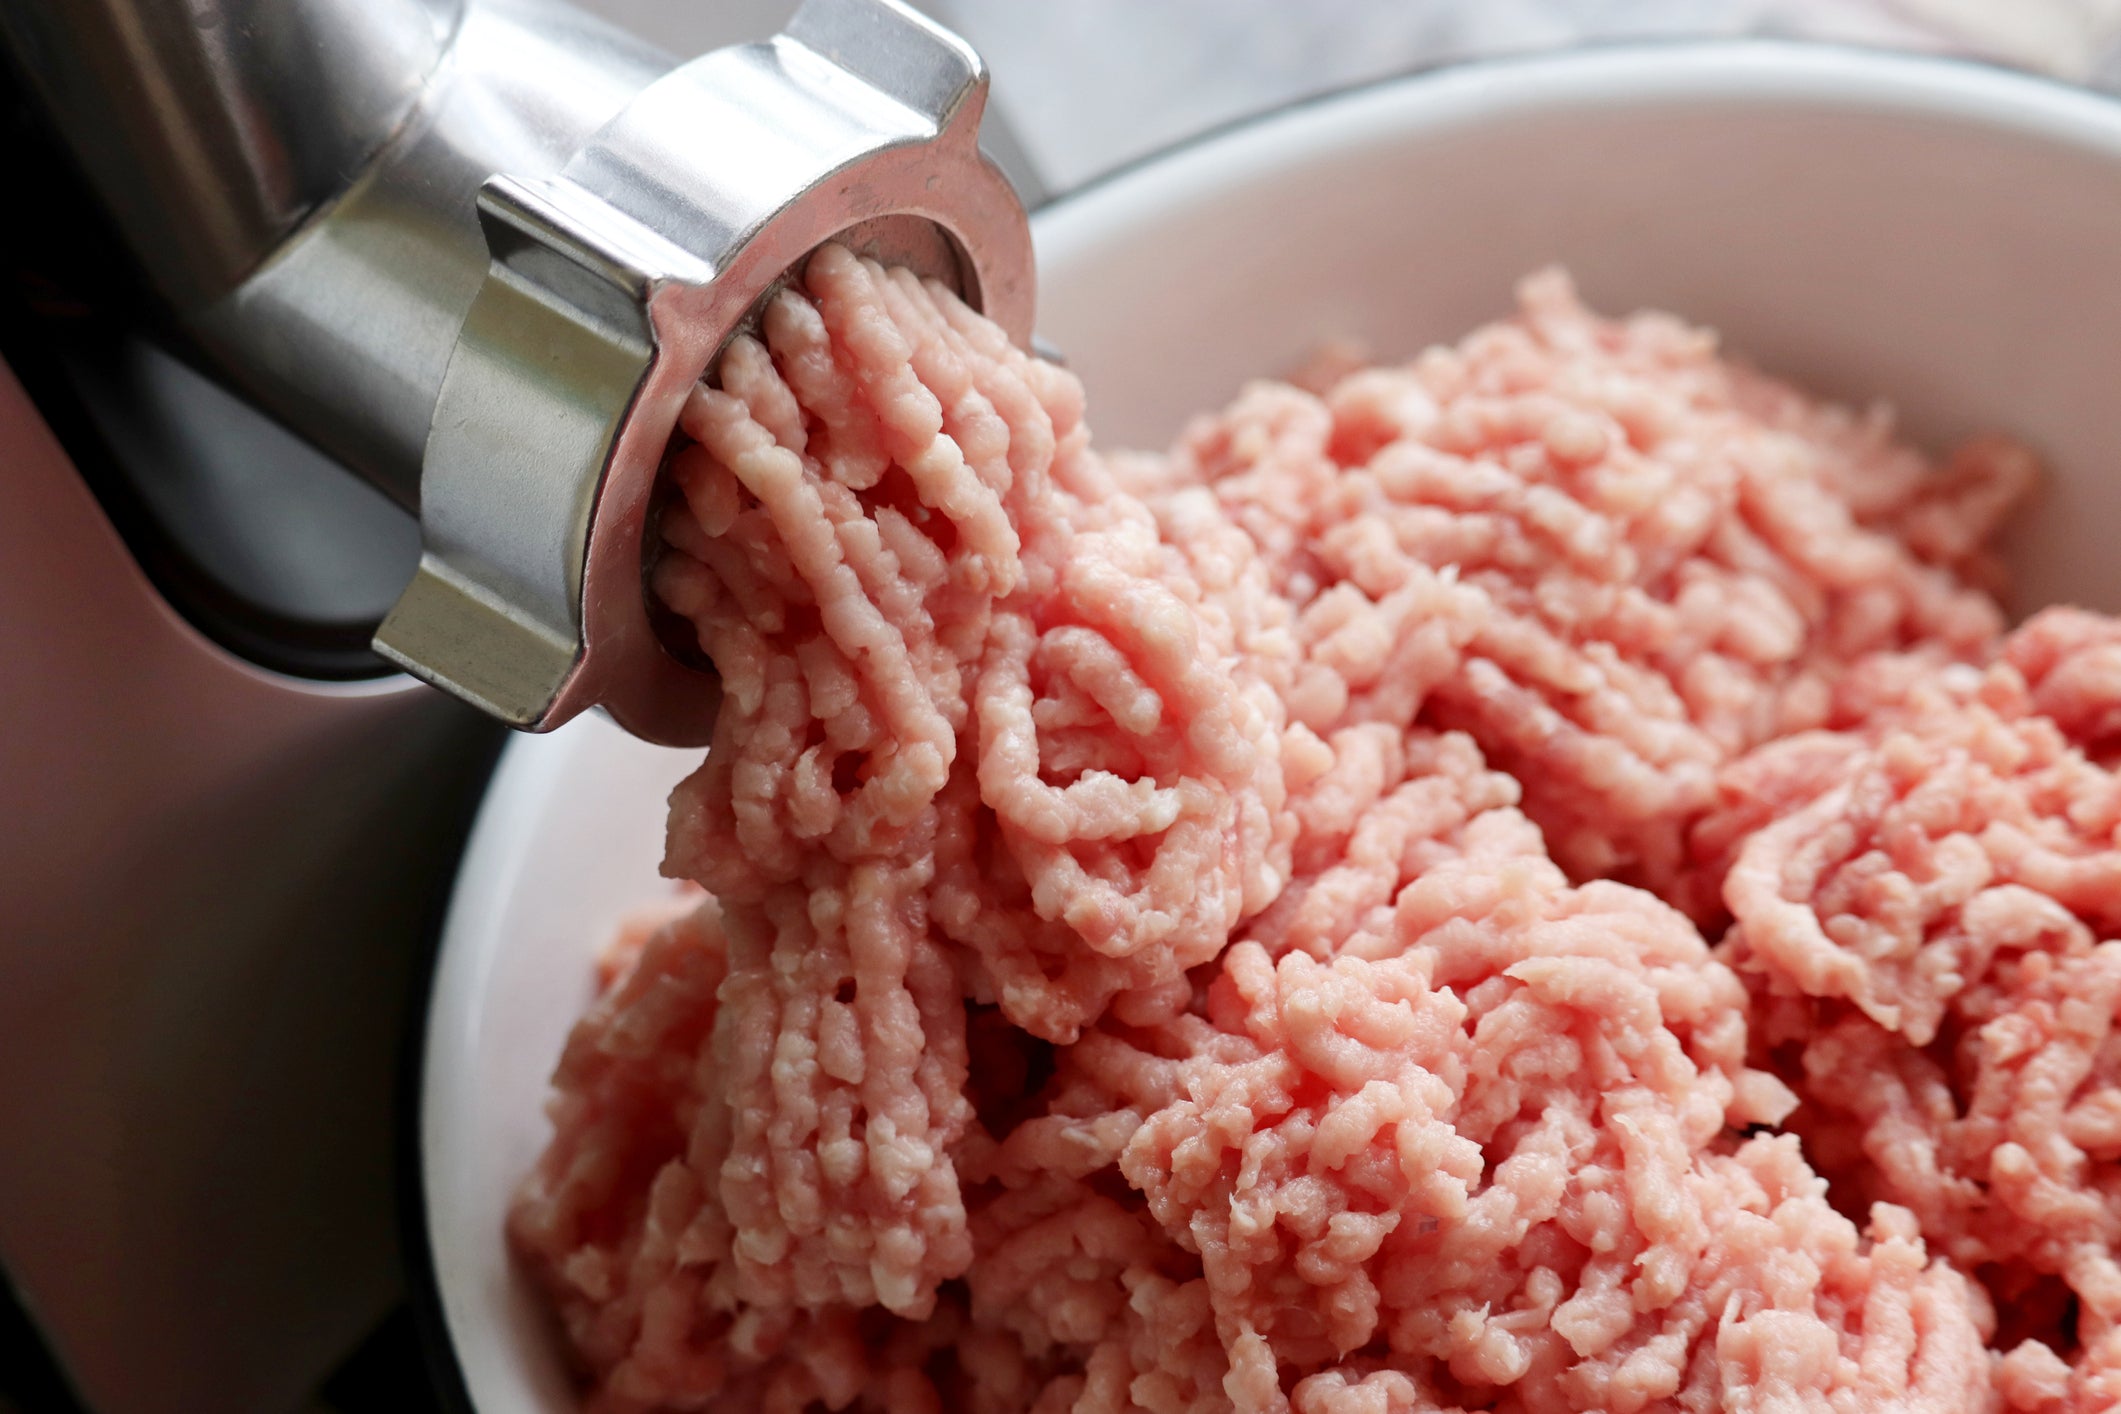 Meat being minced